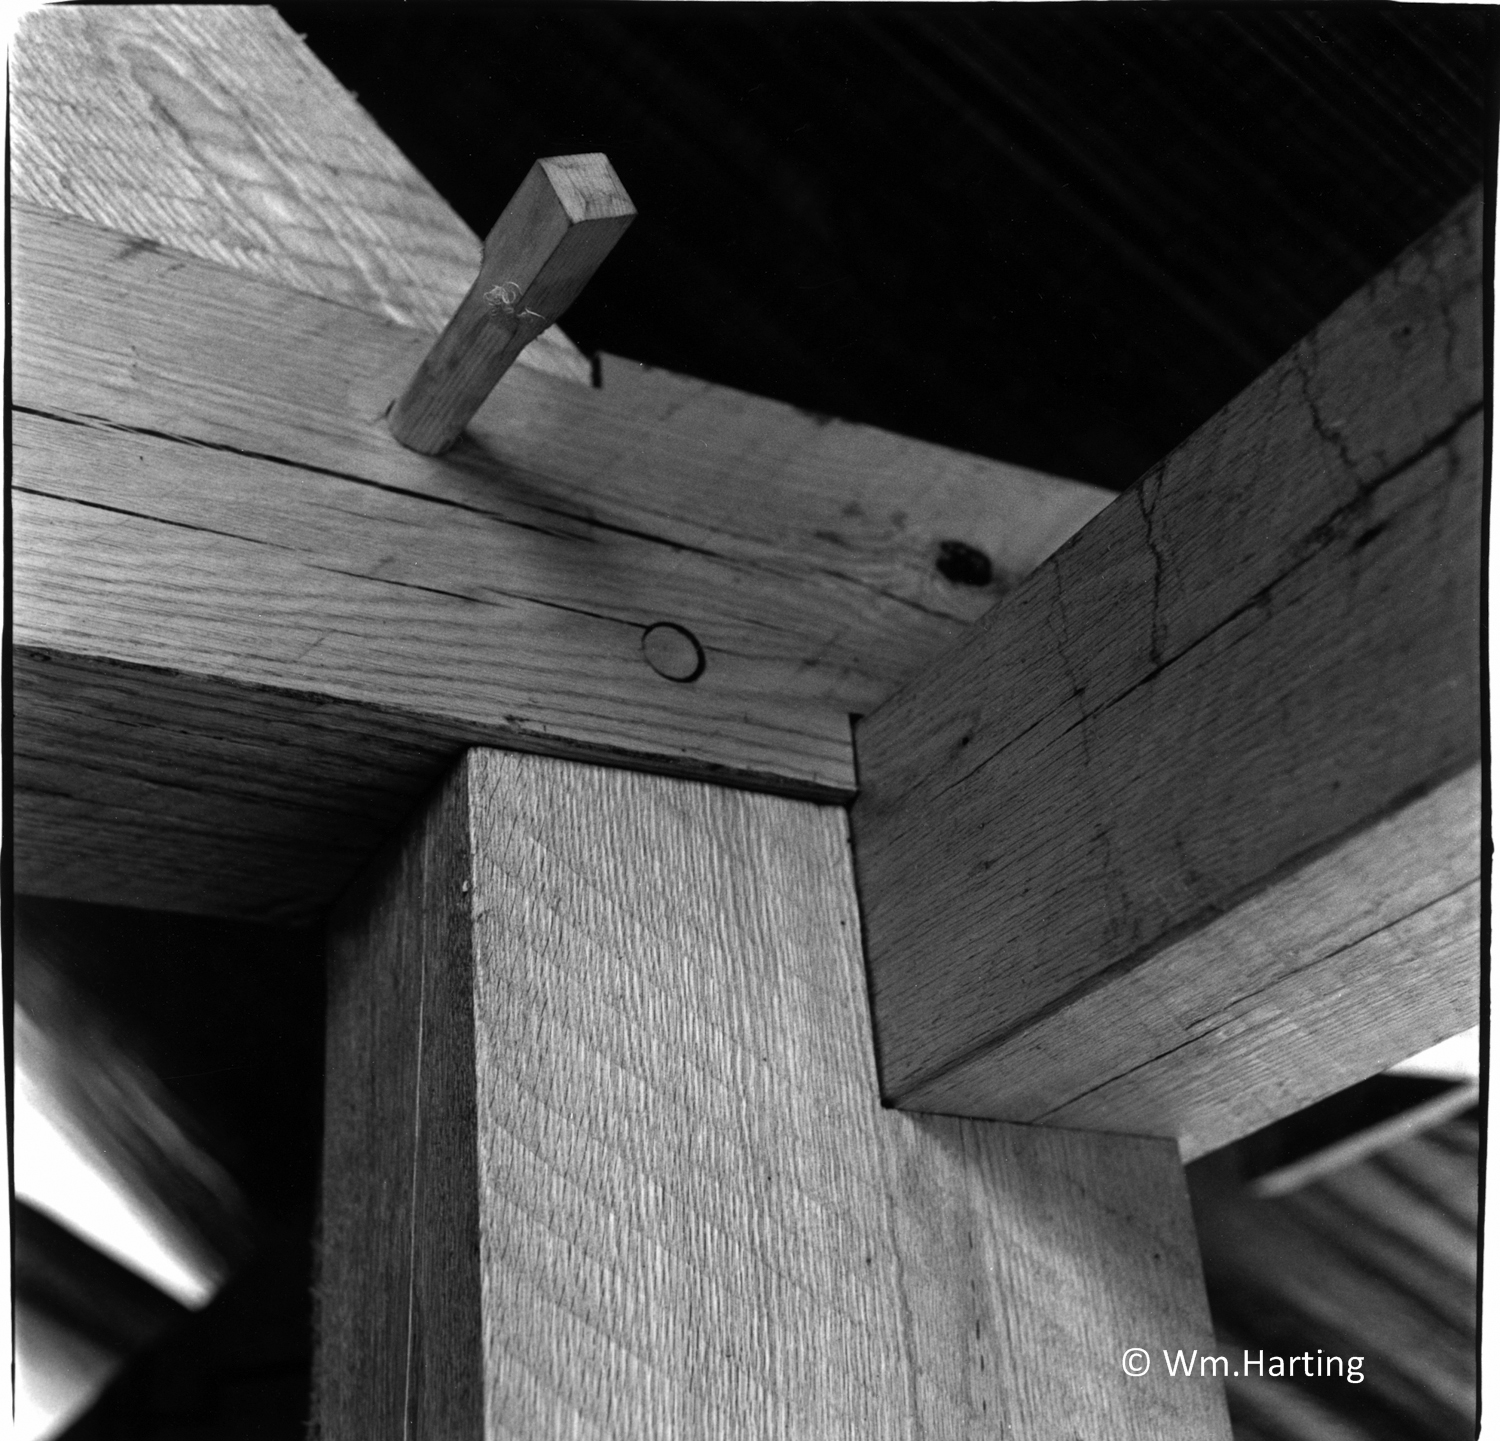    Joinery   . More in album    HAND OF MAN   